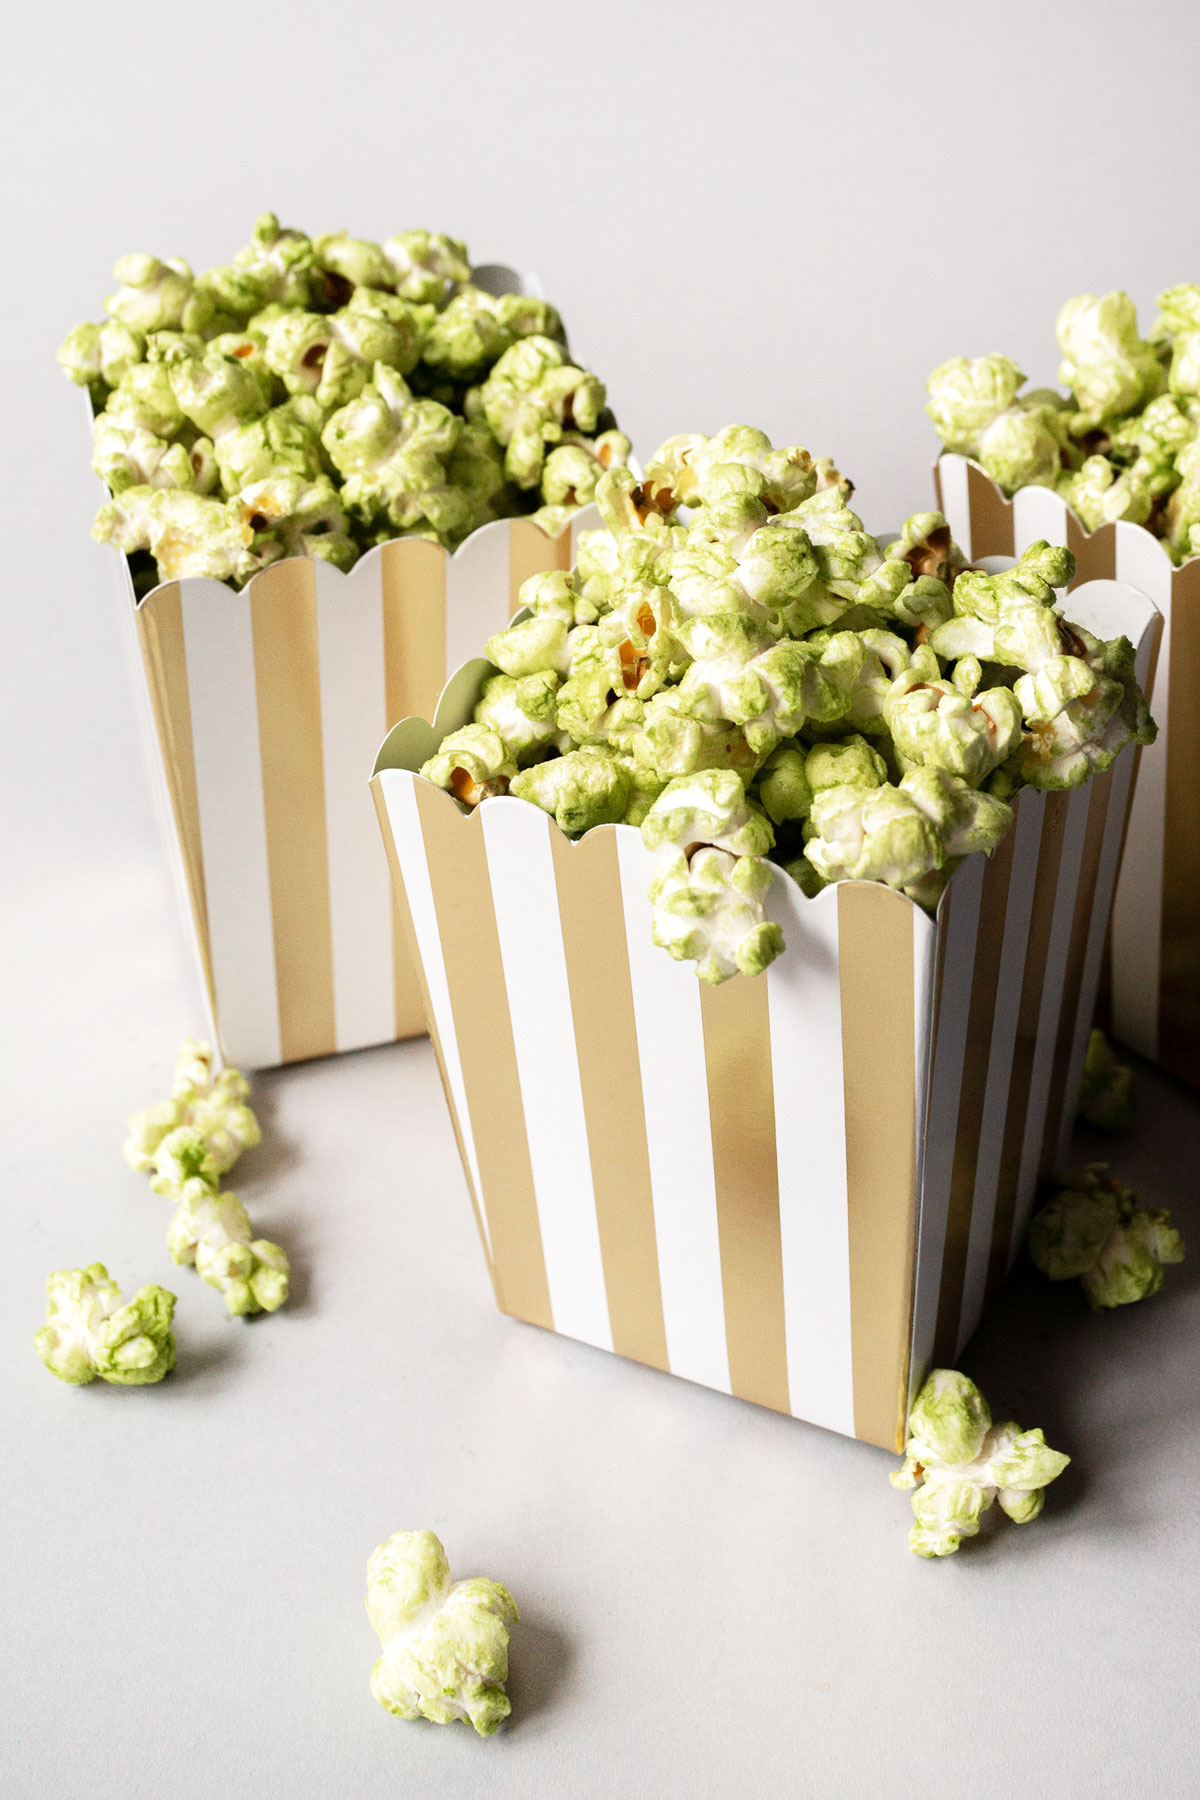 Matcha popcorn in paper popcorn containers.